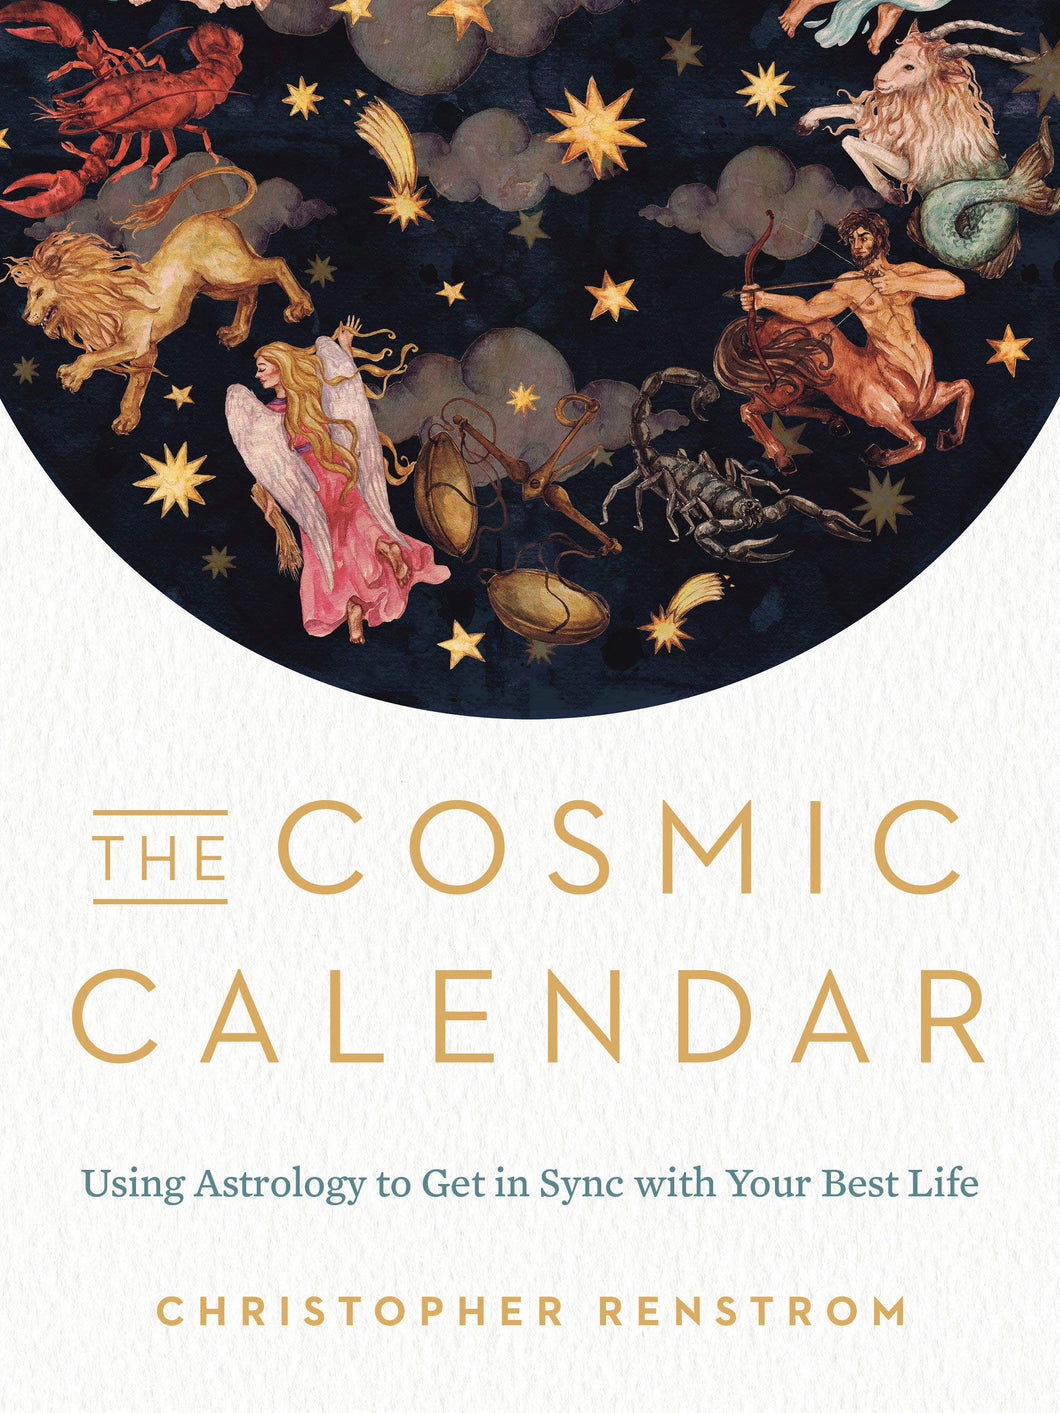 The Cosmic Calendar: Using Astrology to Get in Sync with Your Best Life